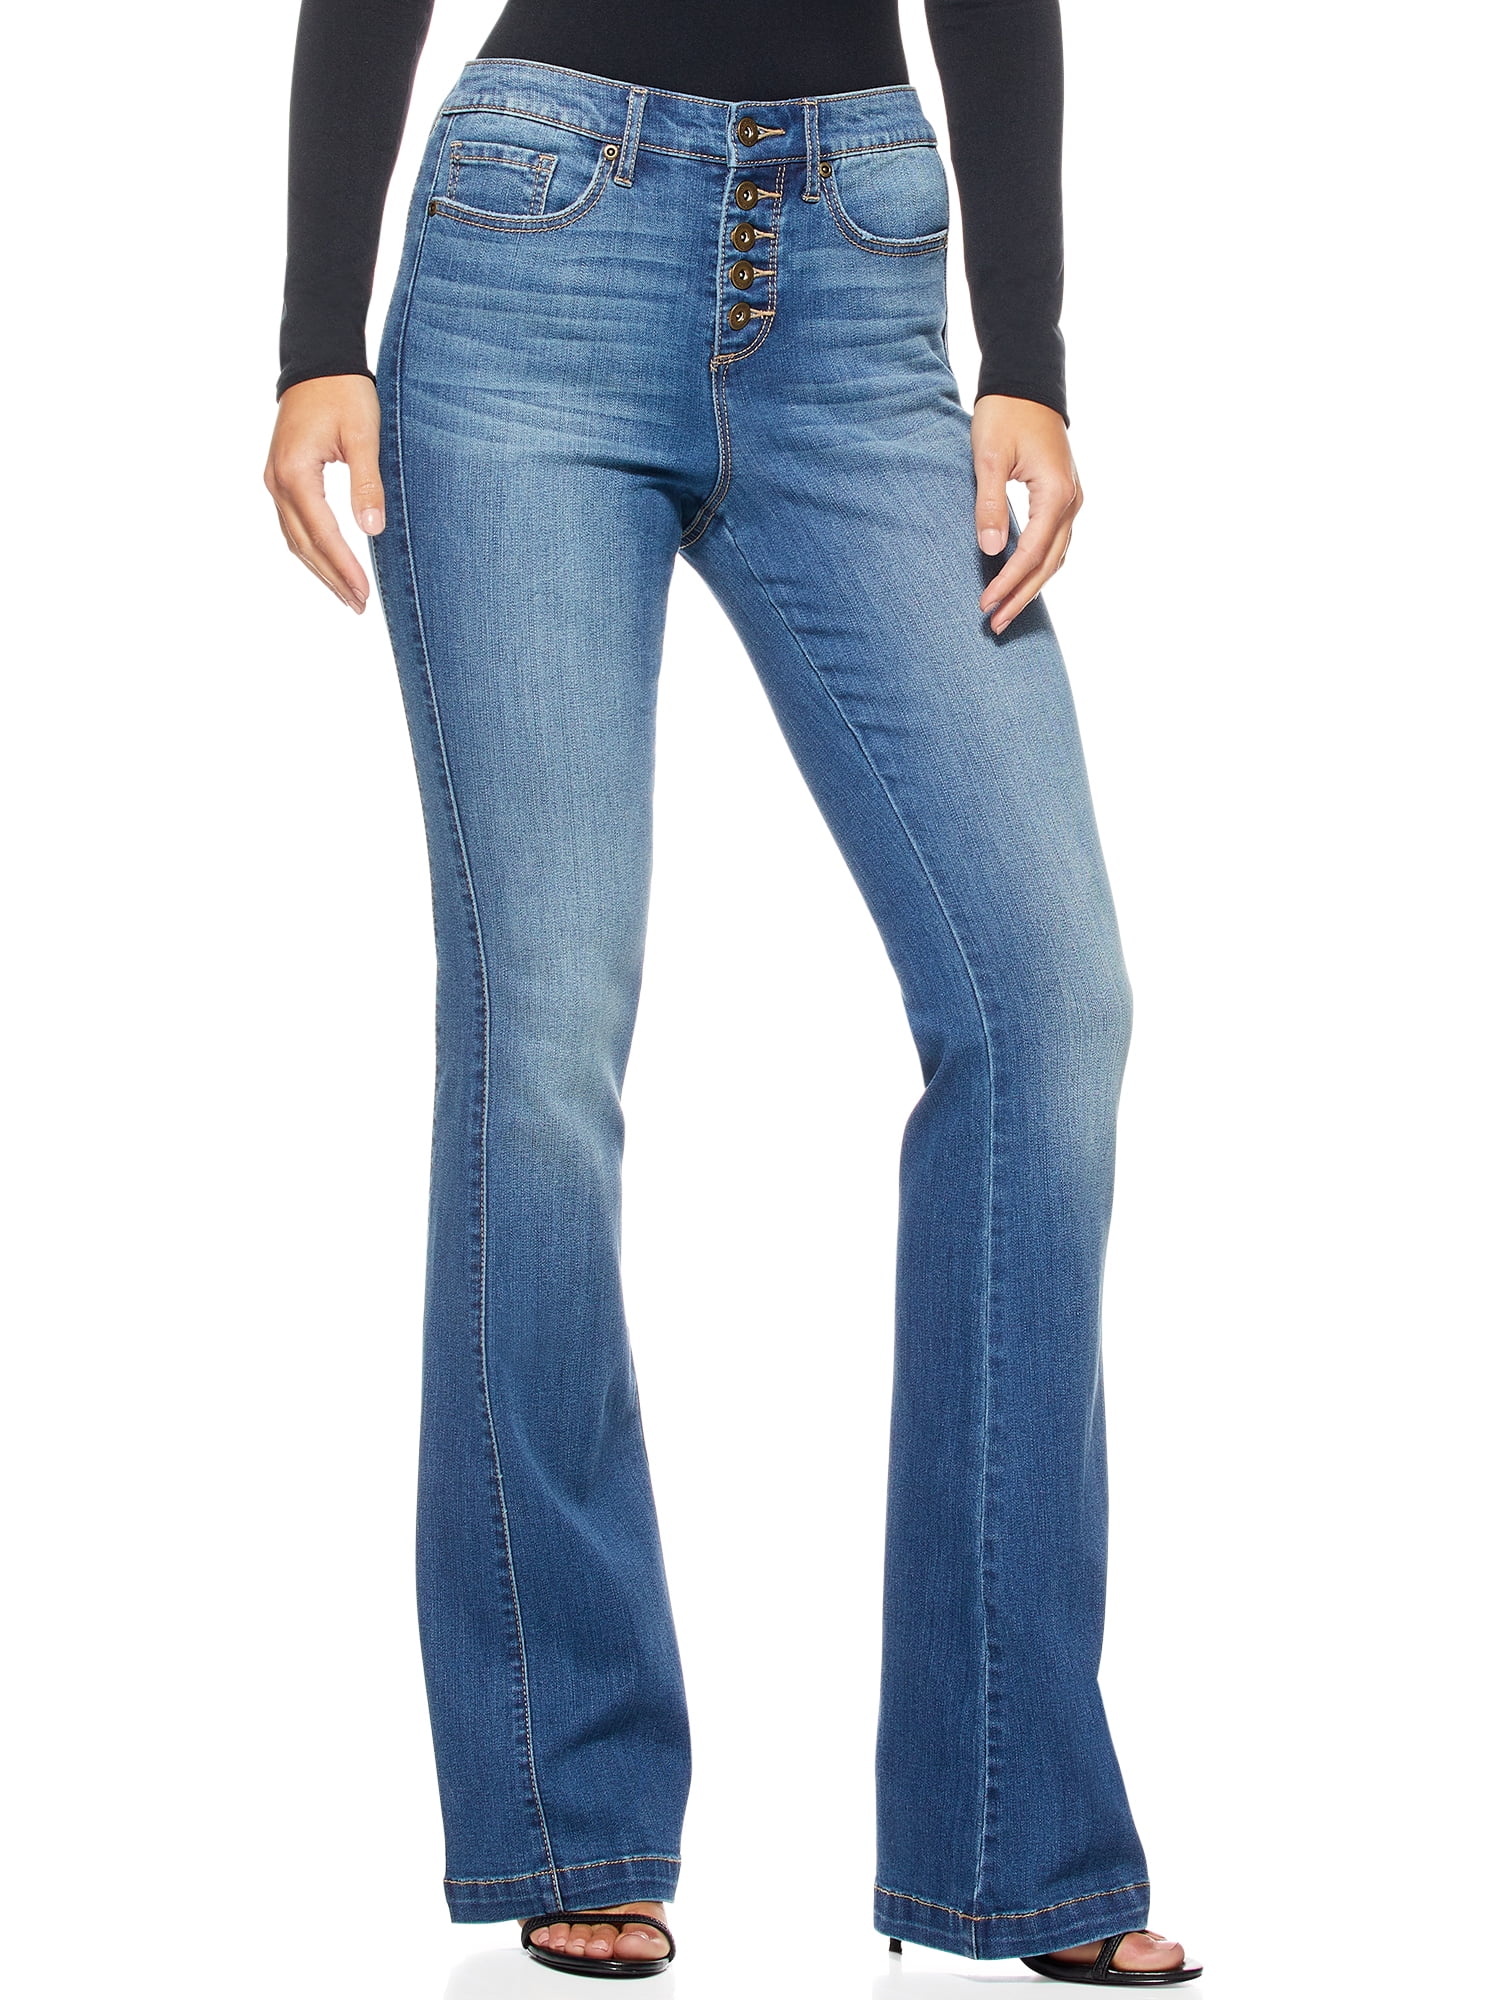 Sofia Jeans by Sofia Vergara Women's Melisa Flare Front Seam with Buttons  Jeans 